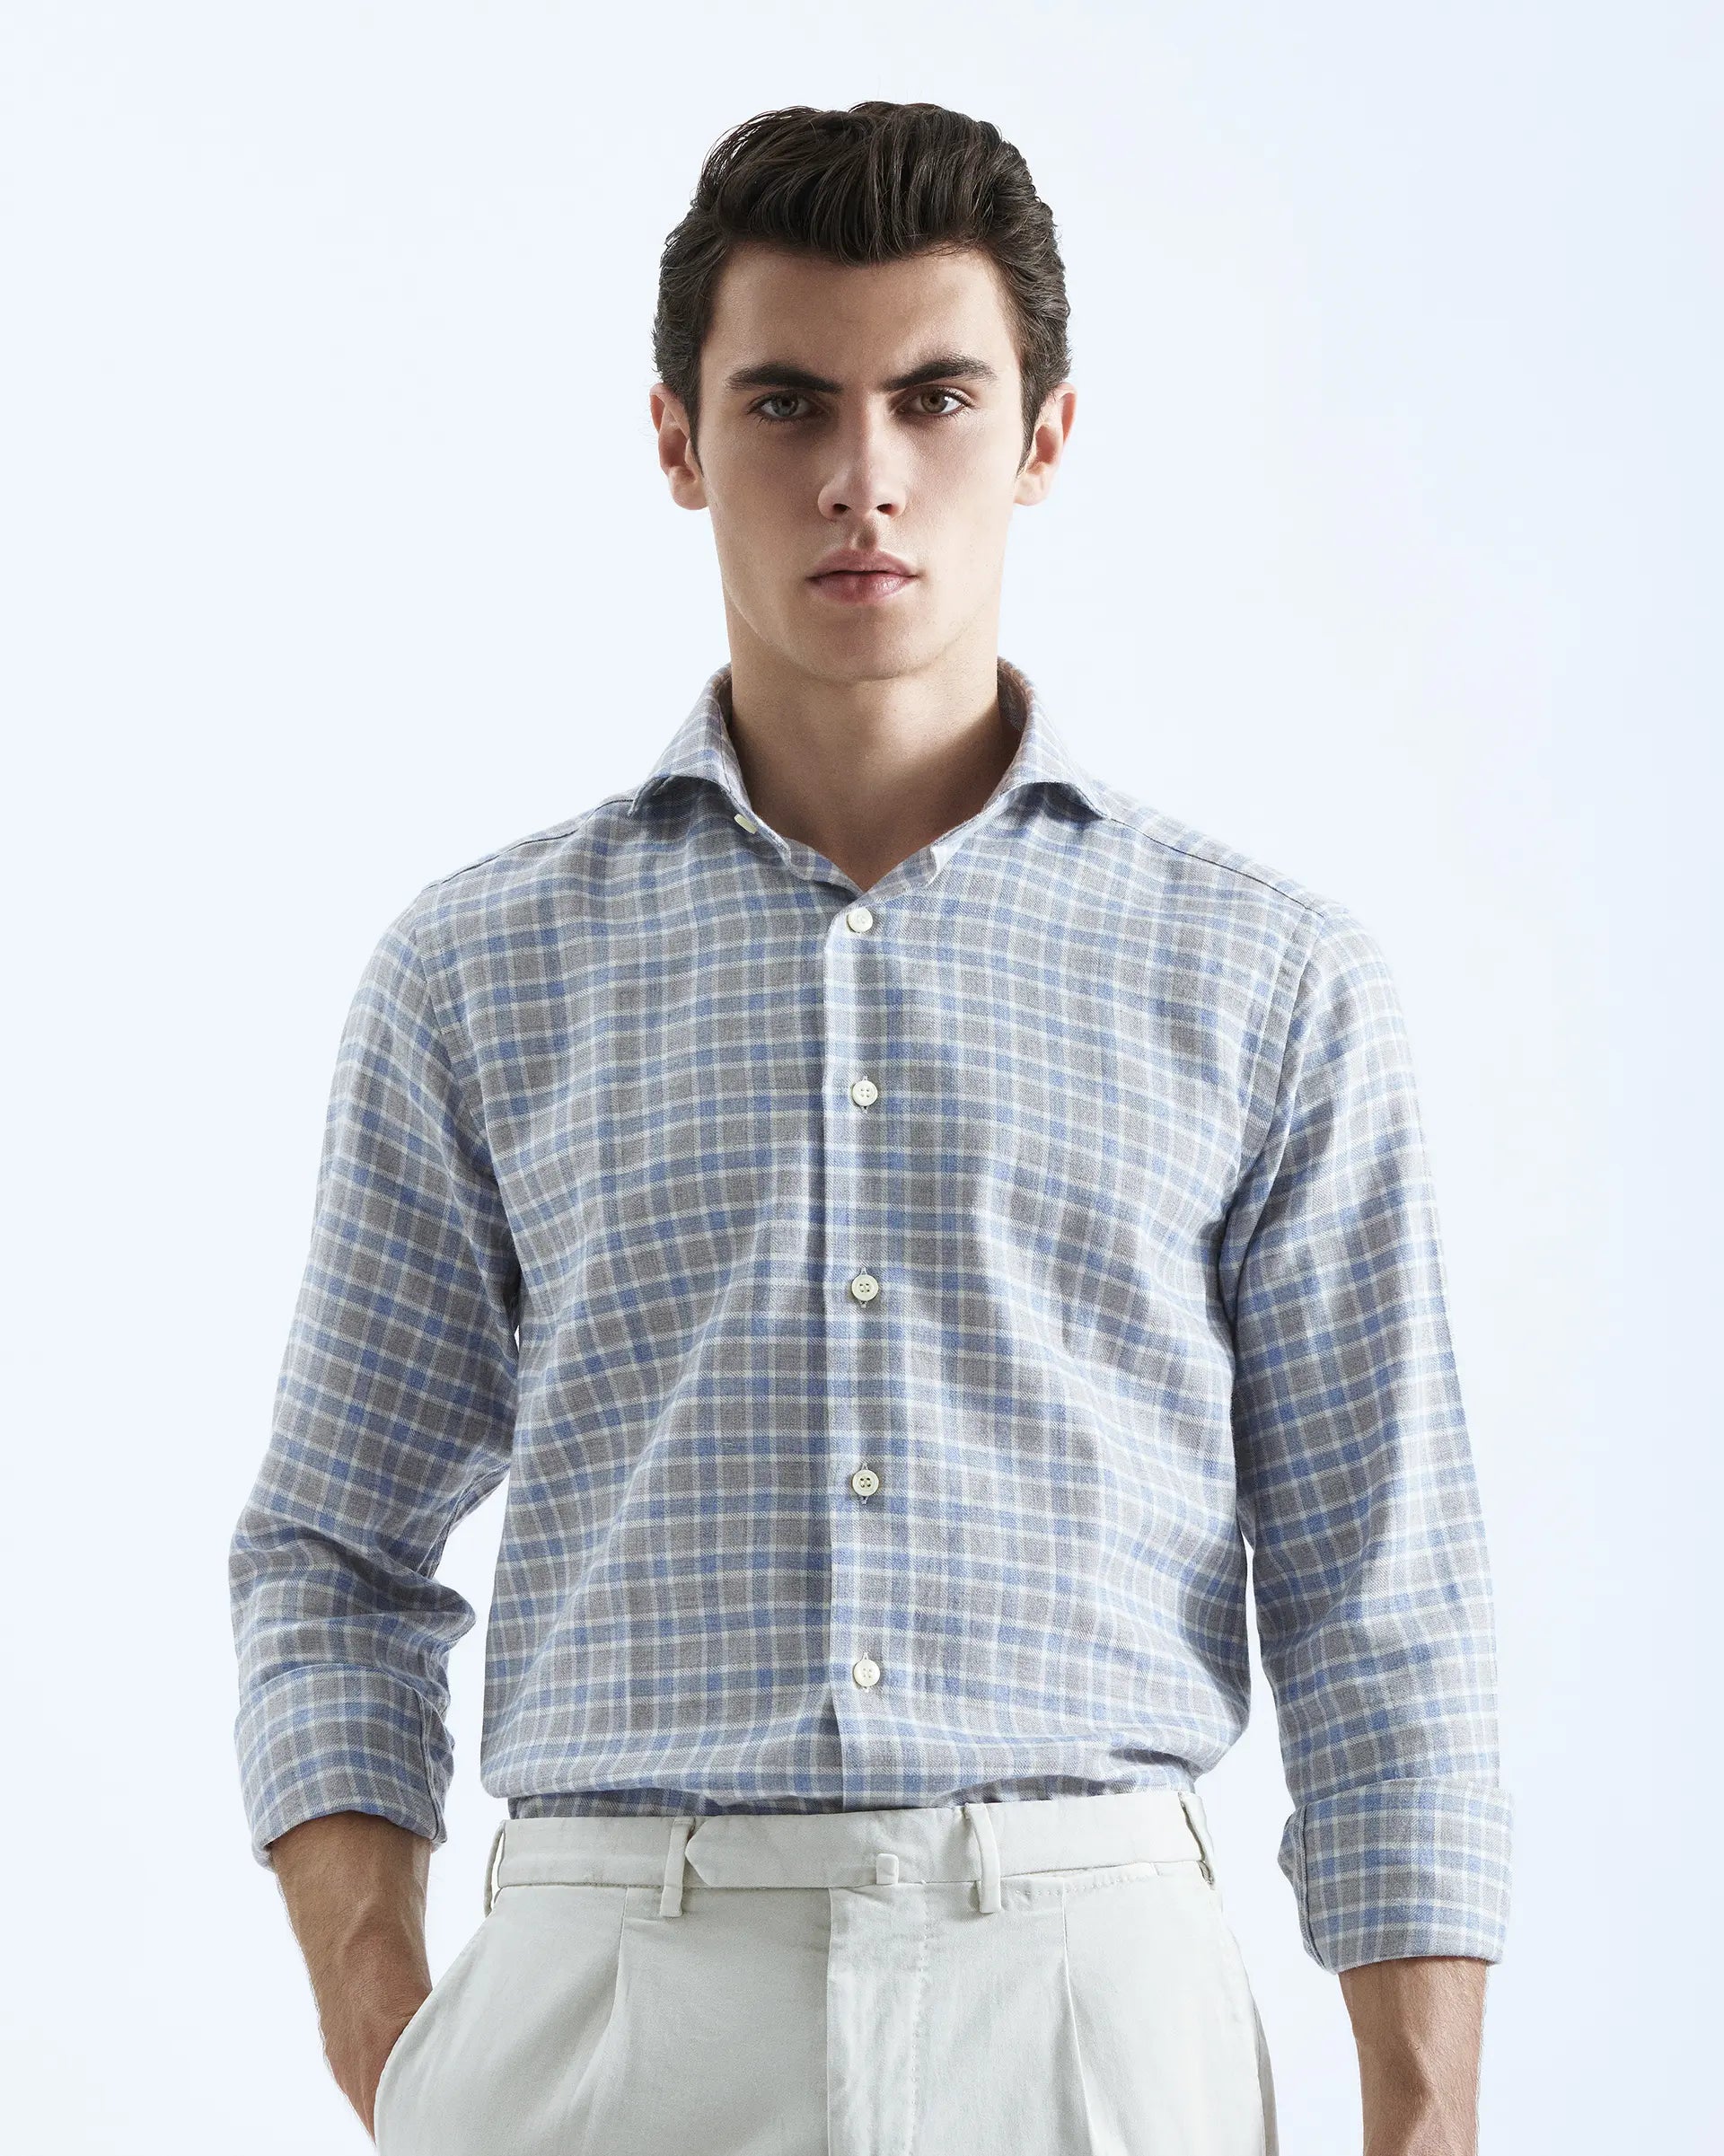 Modern Fit Light Blue and Grey Shirt with 2 button collar